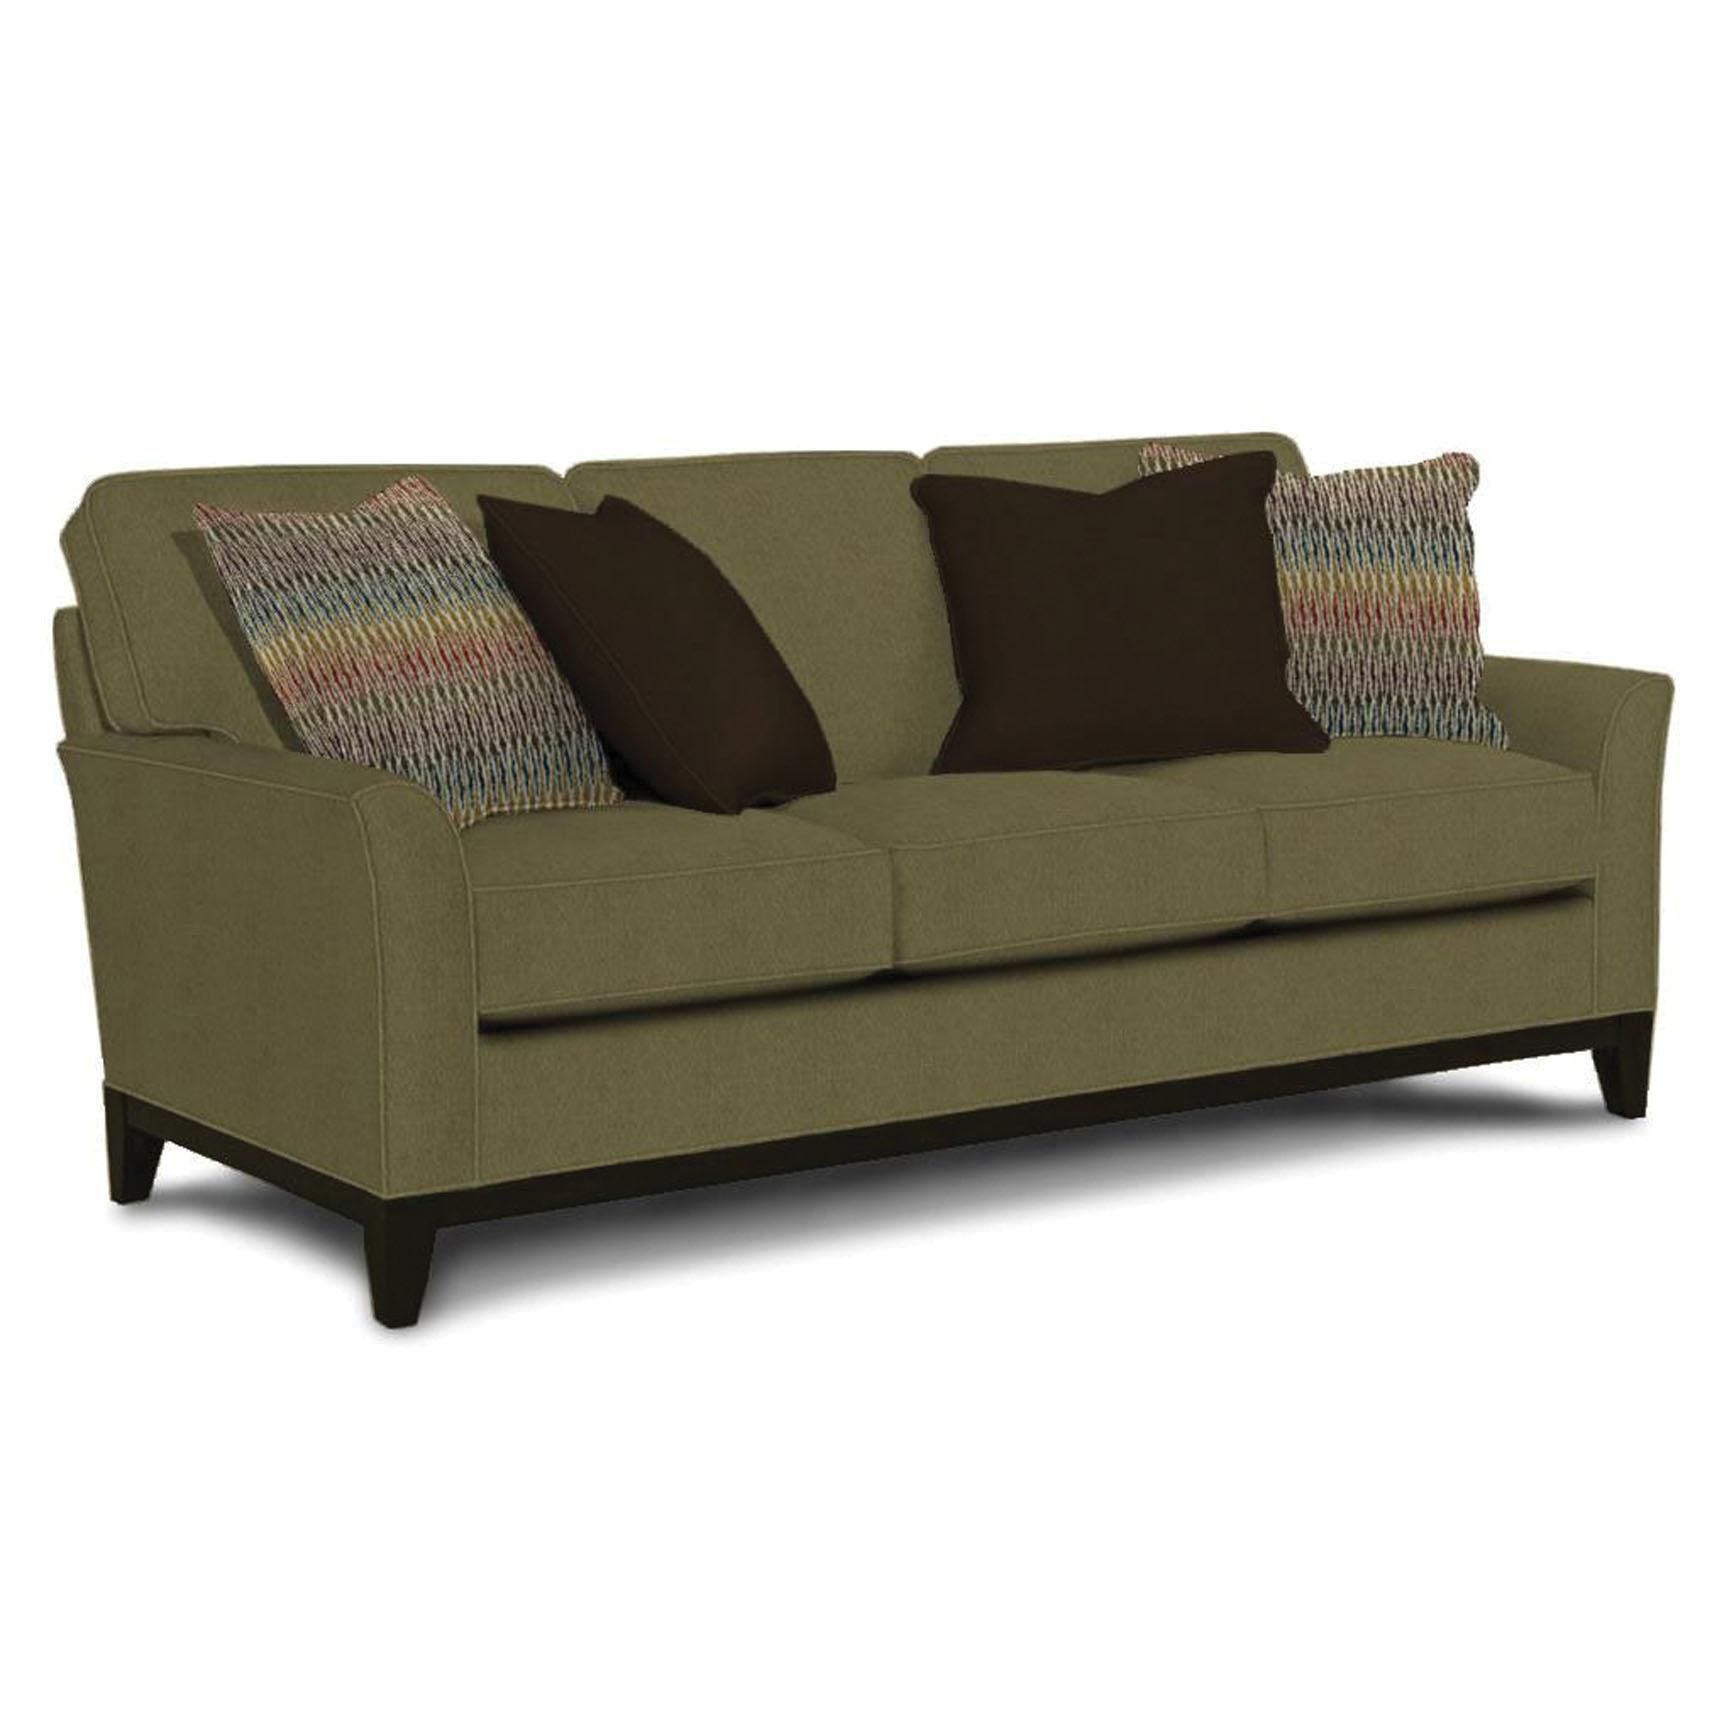 Broyhill Tanners Choice Zachary Leather Sofa Bh L7902 3 Within Broyhill Perspectives Sofas (View 6 of 20)